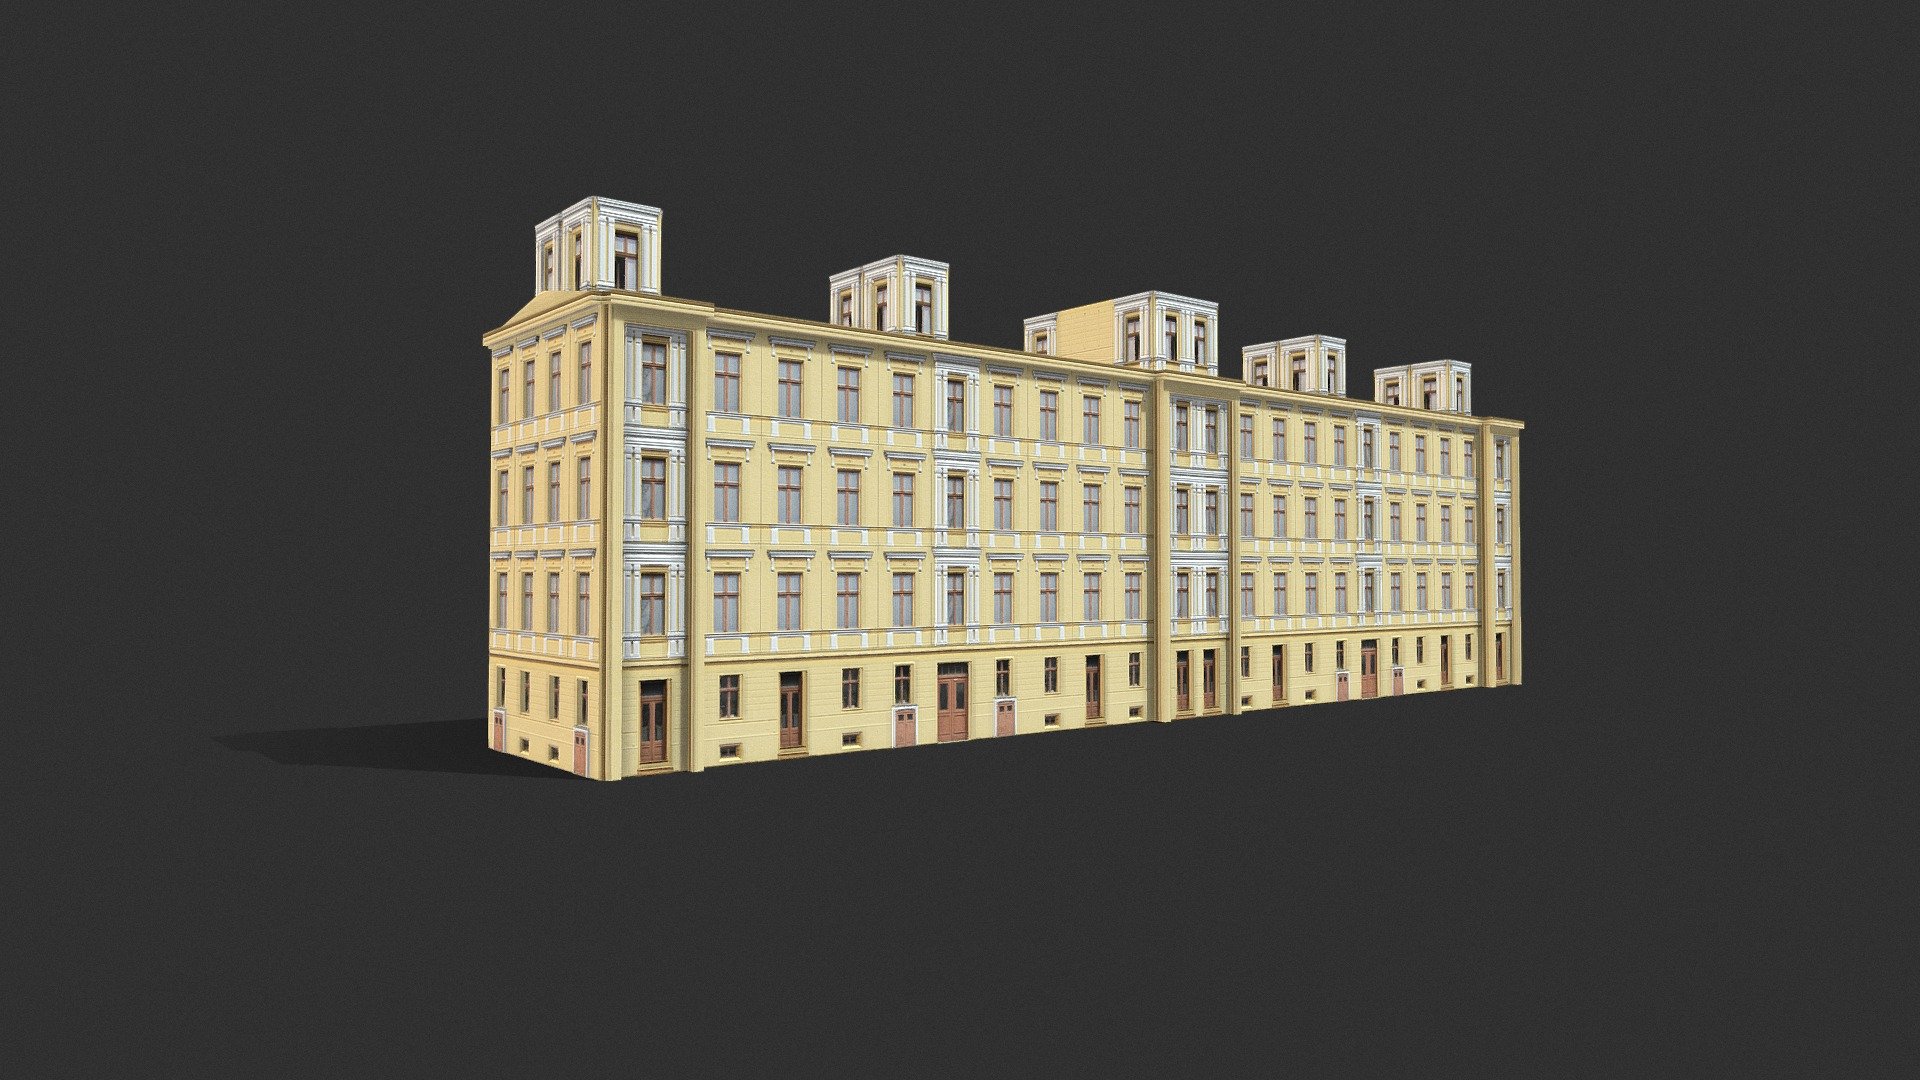 3D model of Old Apartment House

Resolution of textures:  1024x1024, 700x700(roof)
Originally created with 3ds Max 2017
Photorealistic Texture
Unit system is set to centimetre.
Model is built to real-world scale
Rendered in Vray and 

Special notes:
.fbx format is recommended for import in other 3d software. If your software doesn't support .fbx format, please use .3ds format; .obj, format was exported from 3ds Max 3d model